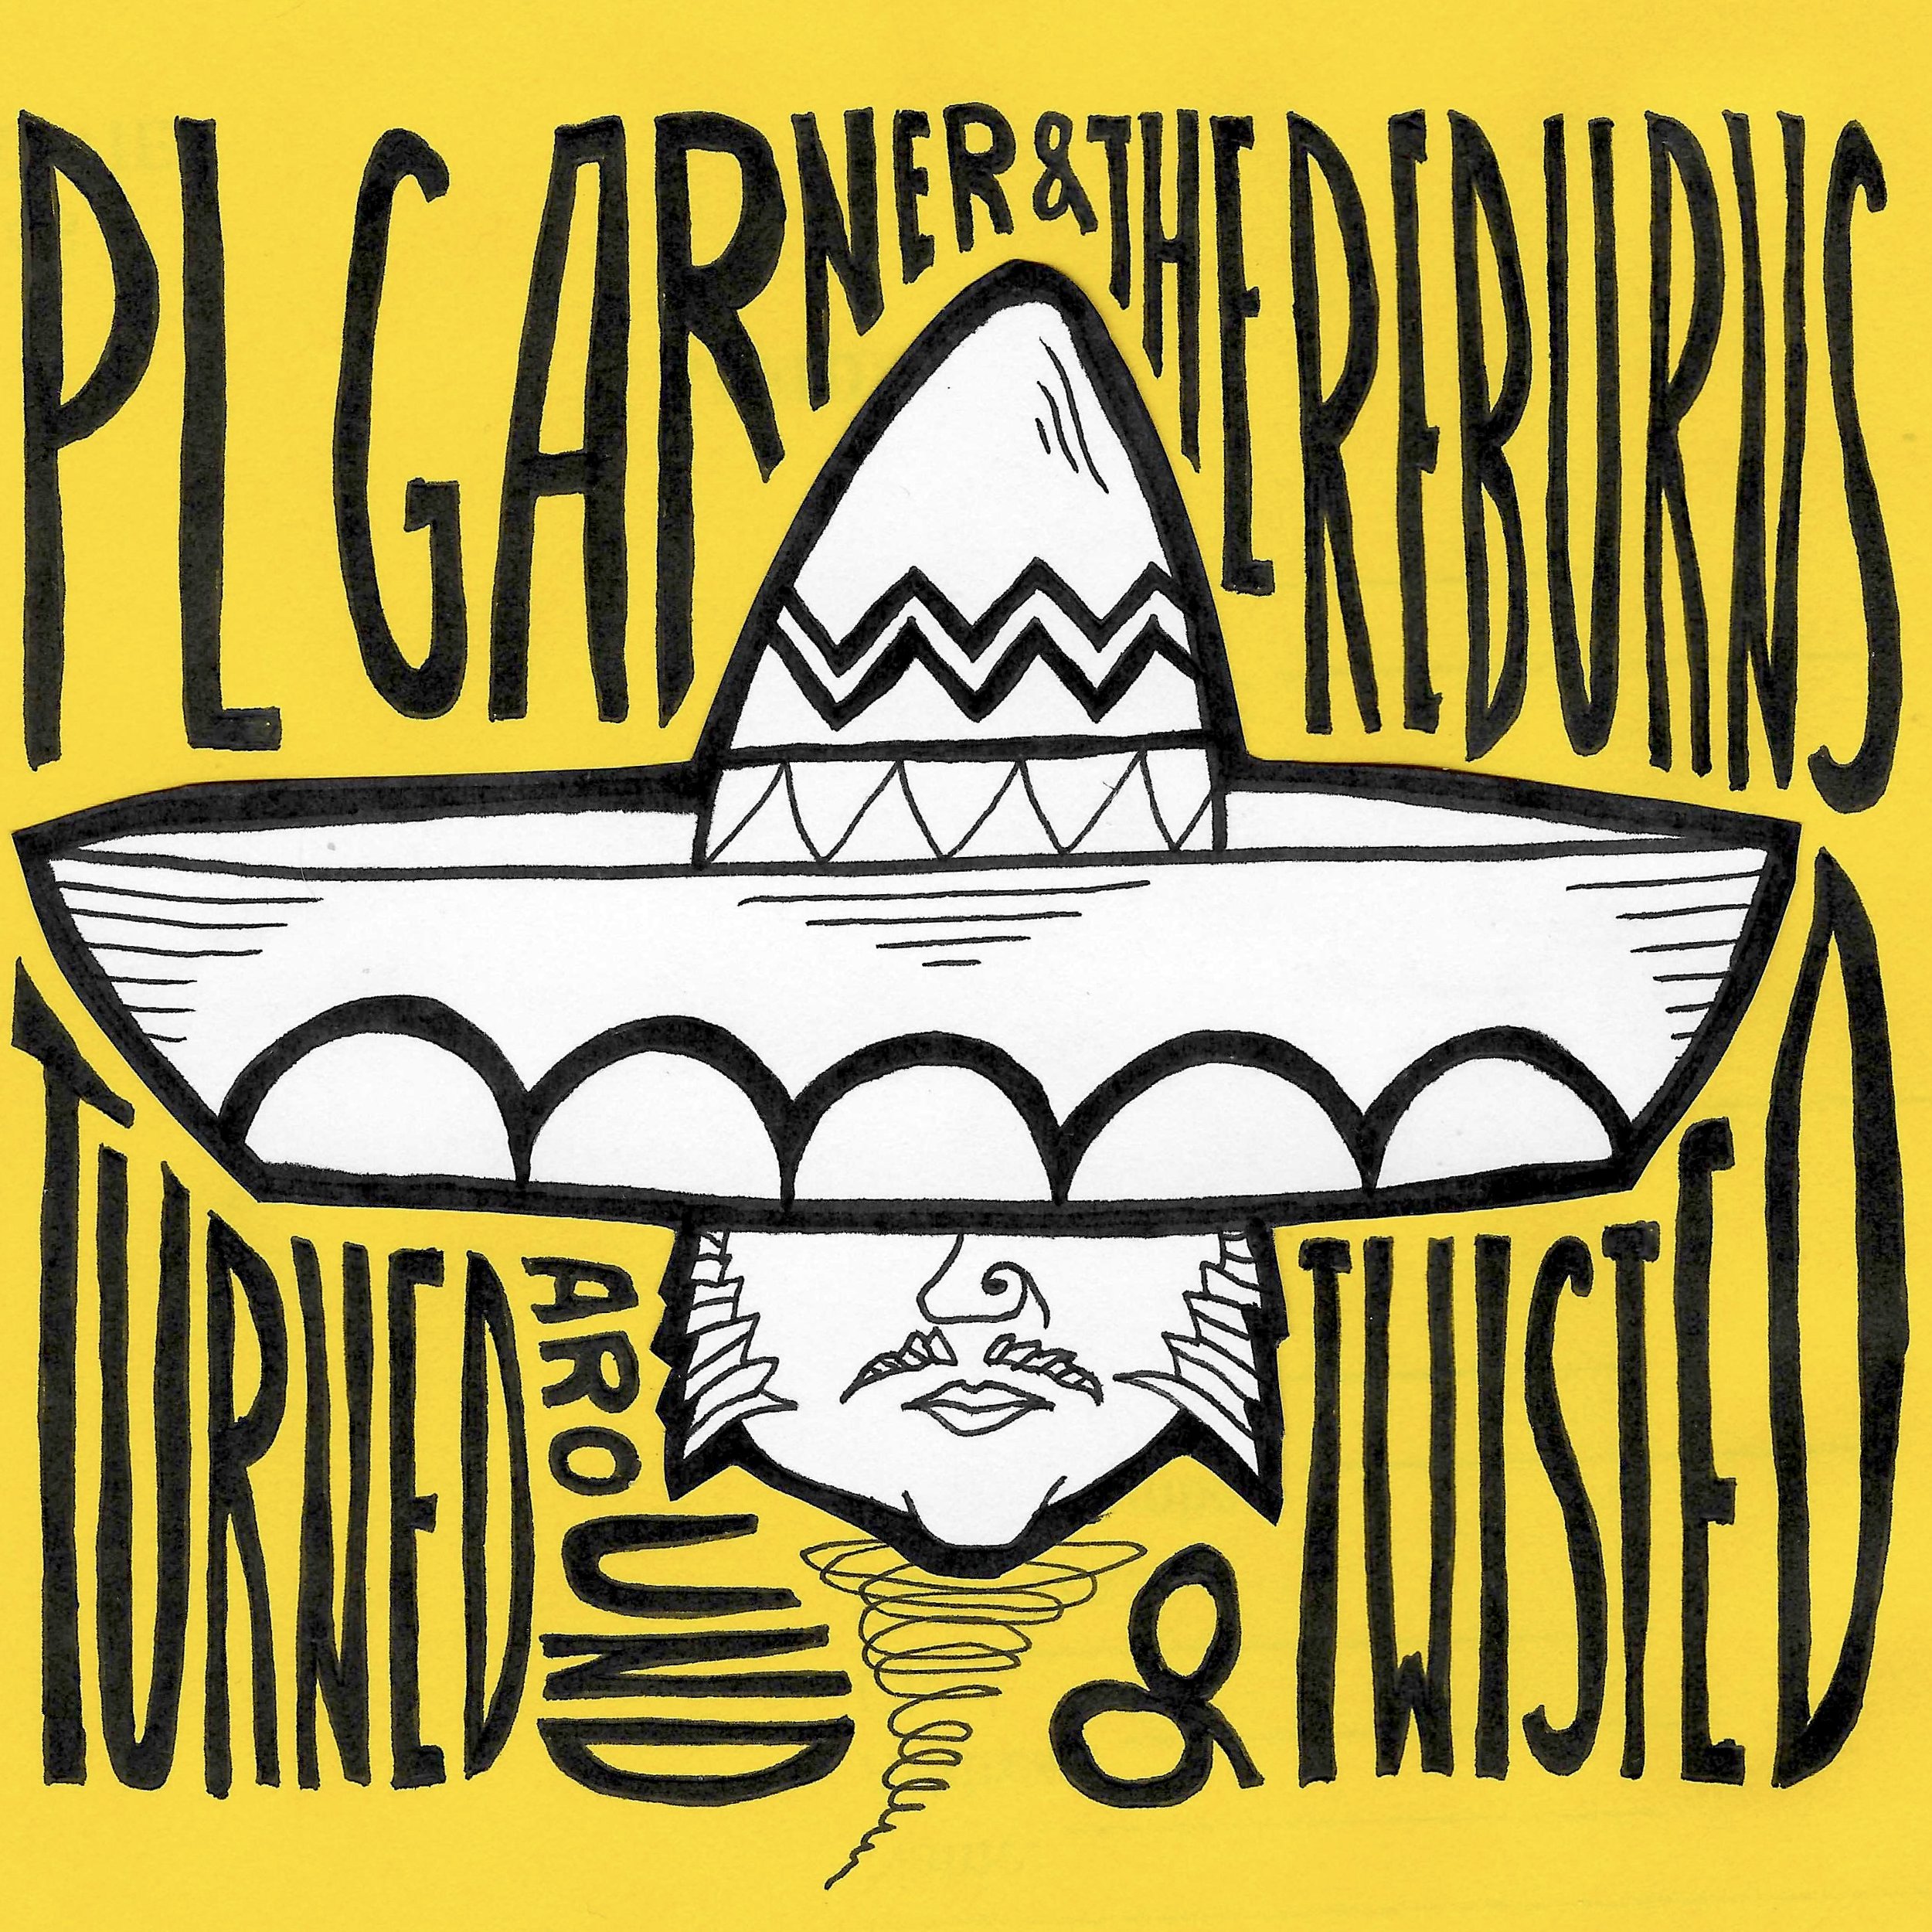 PL Garner & the Reburns "Turned Around & Twisted" Single Cover